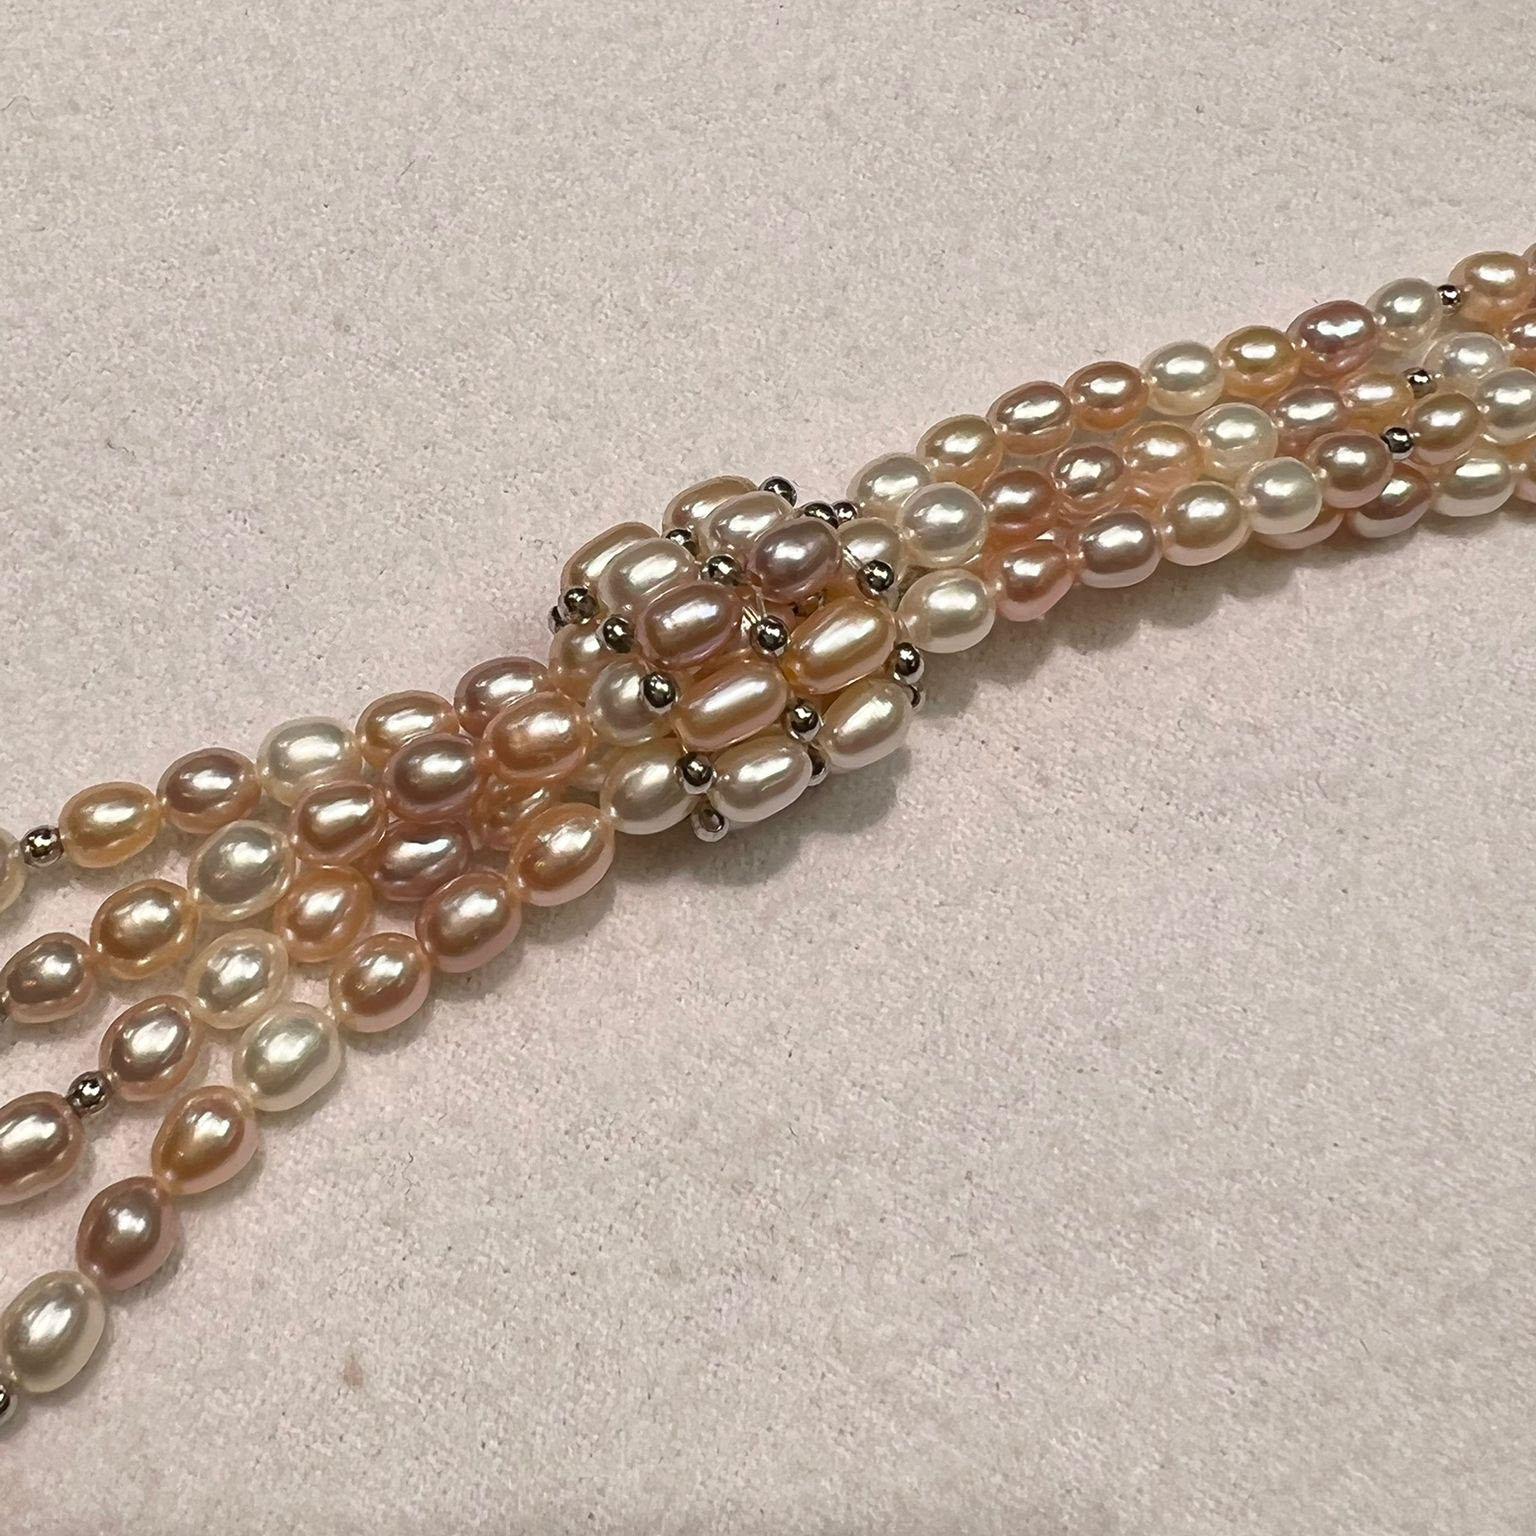 2 Strand Lariat Pearls with Tassel For Sale 3